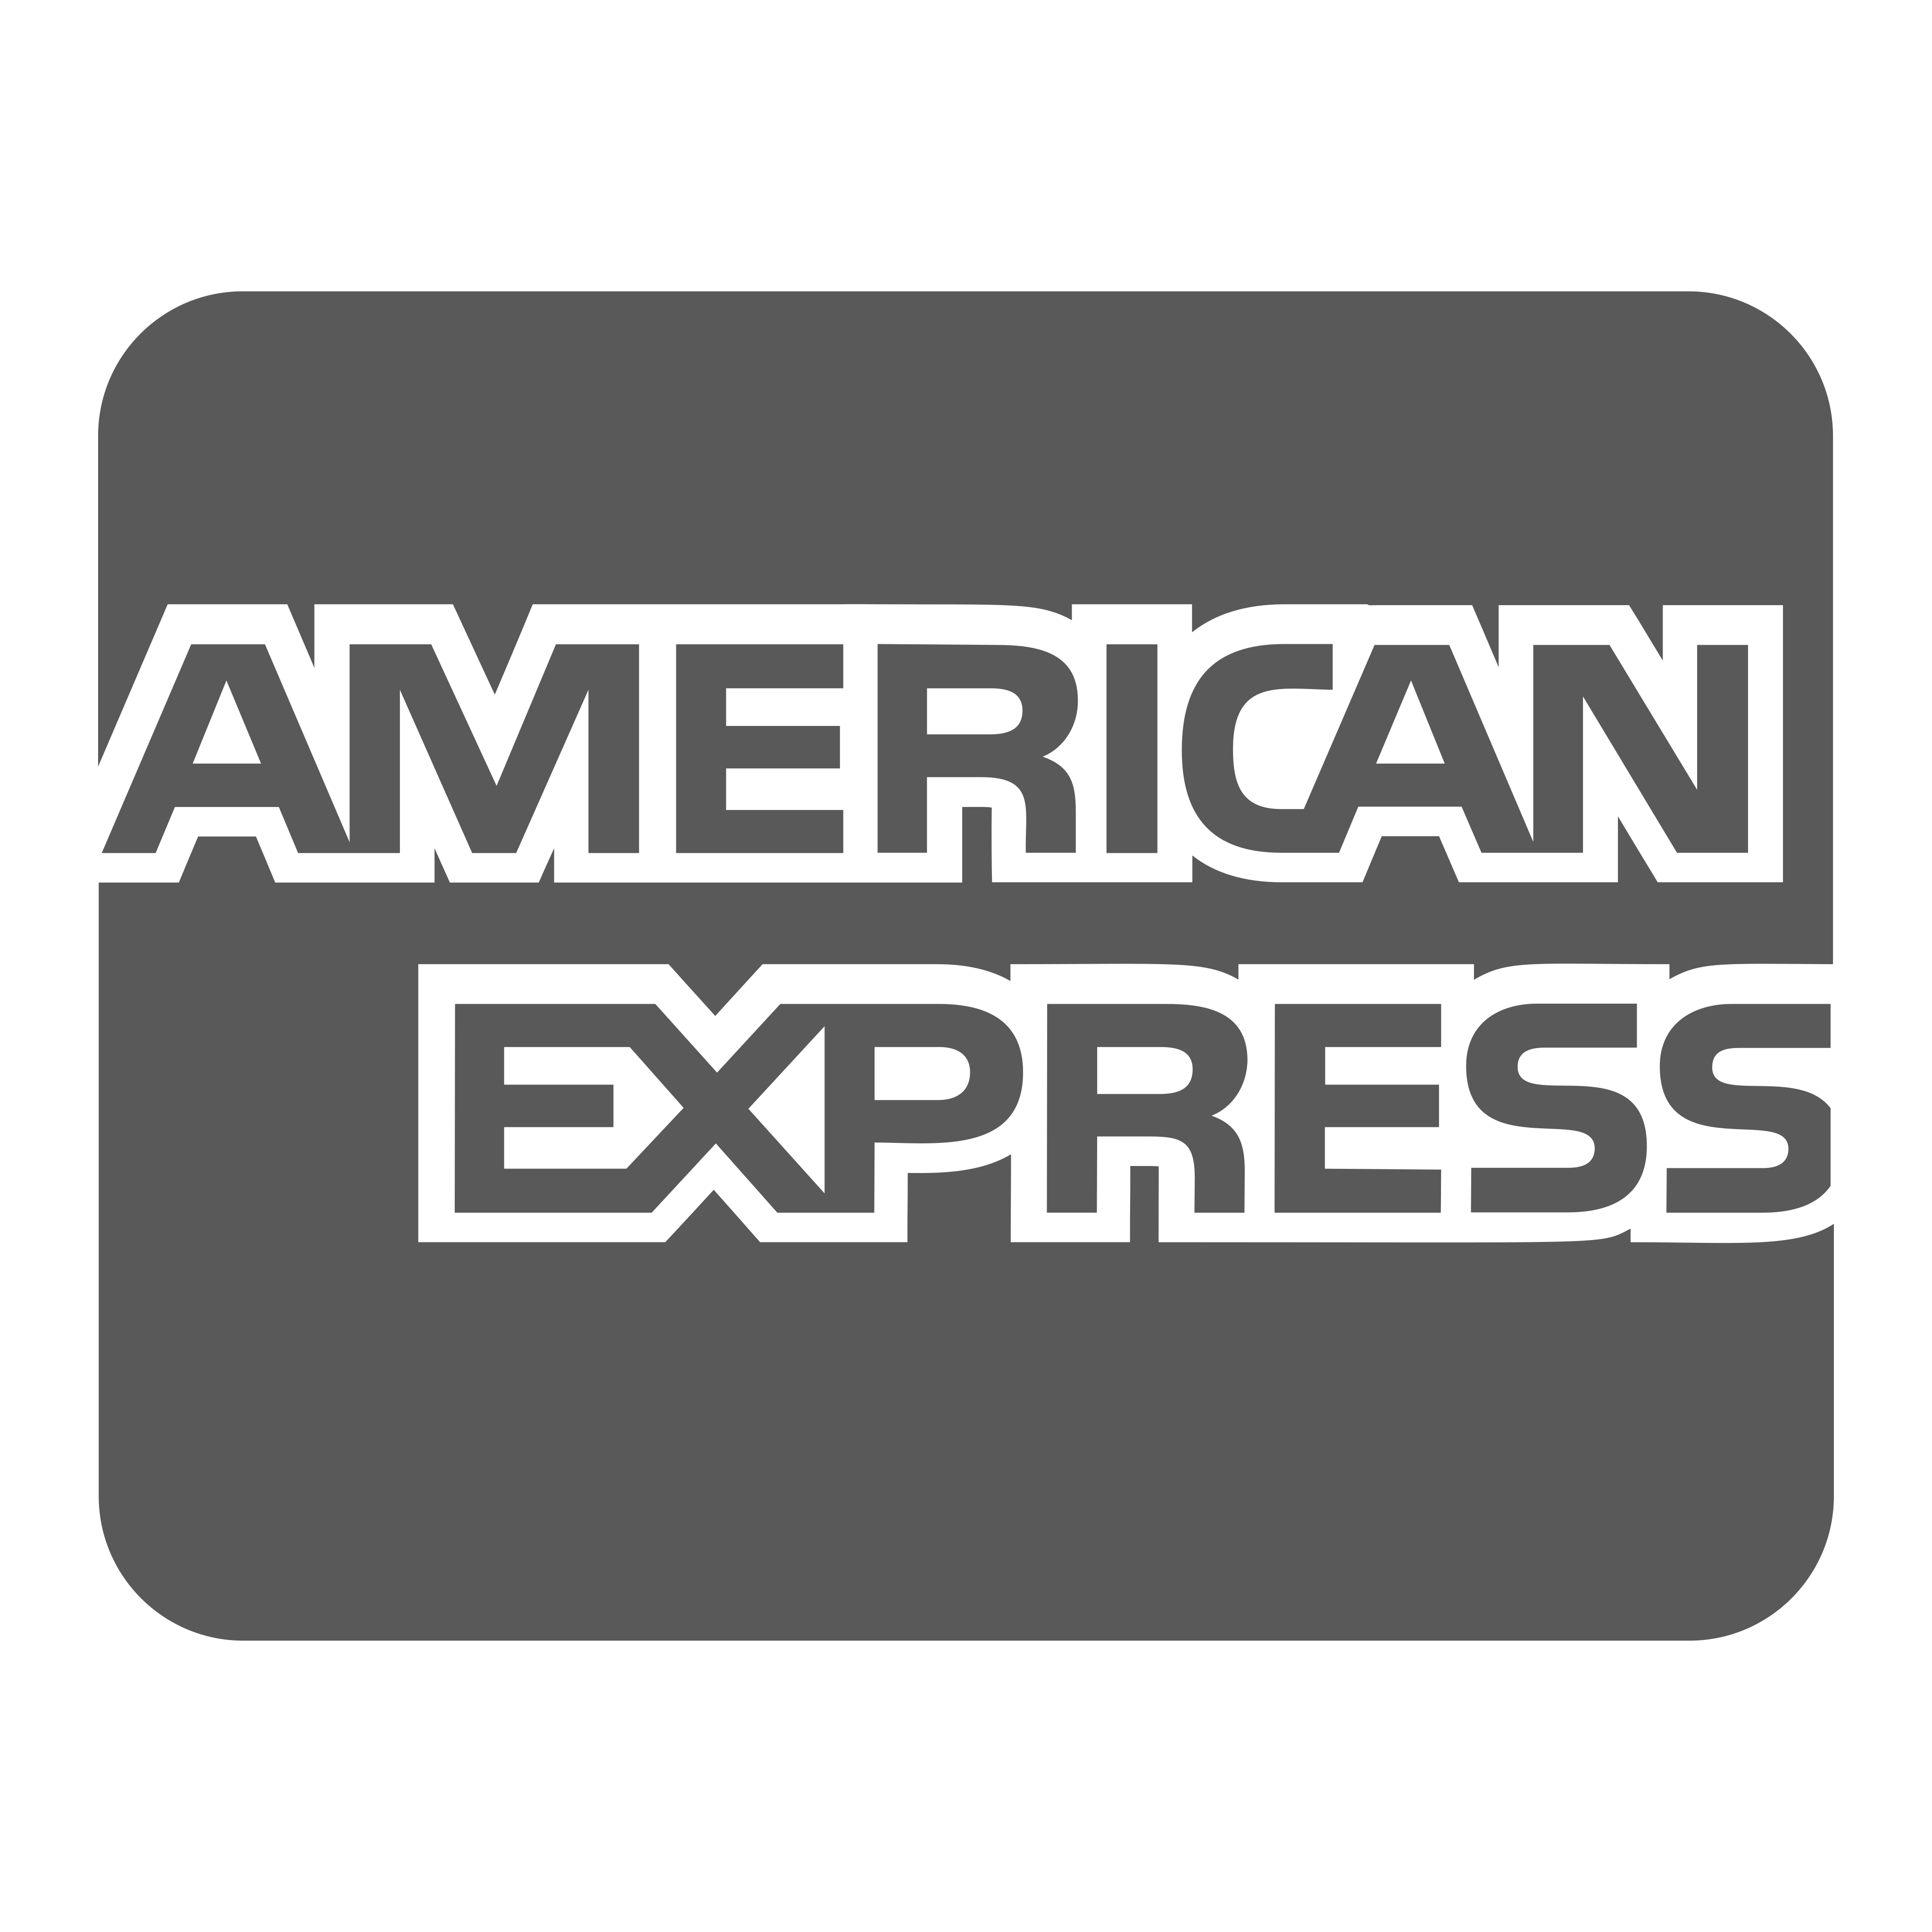 American-express.png